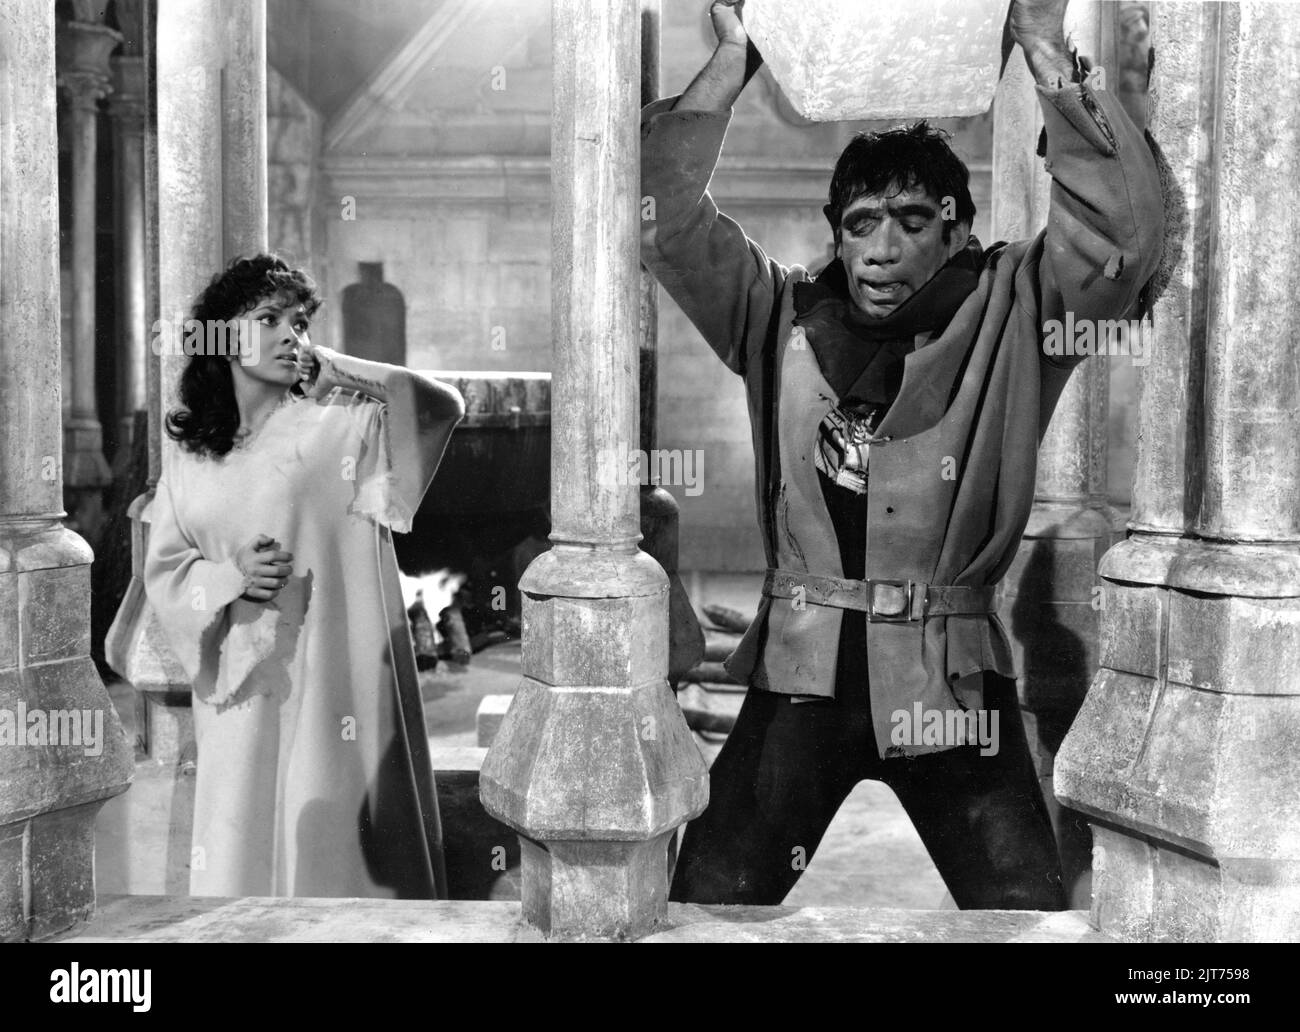 GINA LOLLOBRIGIDA as Esmeralda and ANTHONY QUINN as Quasimodo in THE HUNCHBACK OF NOTRE DAME / NOTRE DAME DE PARIS 1956 director JEAN DELANNOY novel Victor Hugo adaptation / dialogue Jean Aurenche and Jacques Prevert music Georges Auric costume design Georges Benda production design Rene Renoux choreographer Leonid Massine producers Raymond and Robert Hakim France - Italy co-production Paris Film Productions / Panitalia Stock Photo